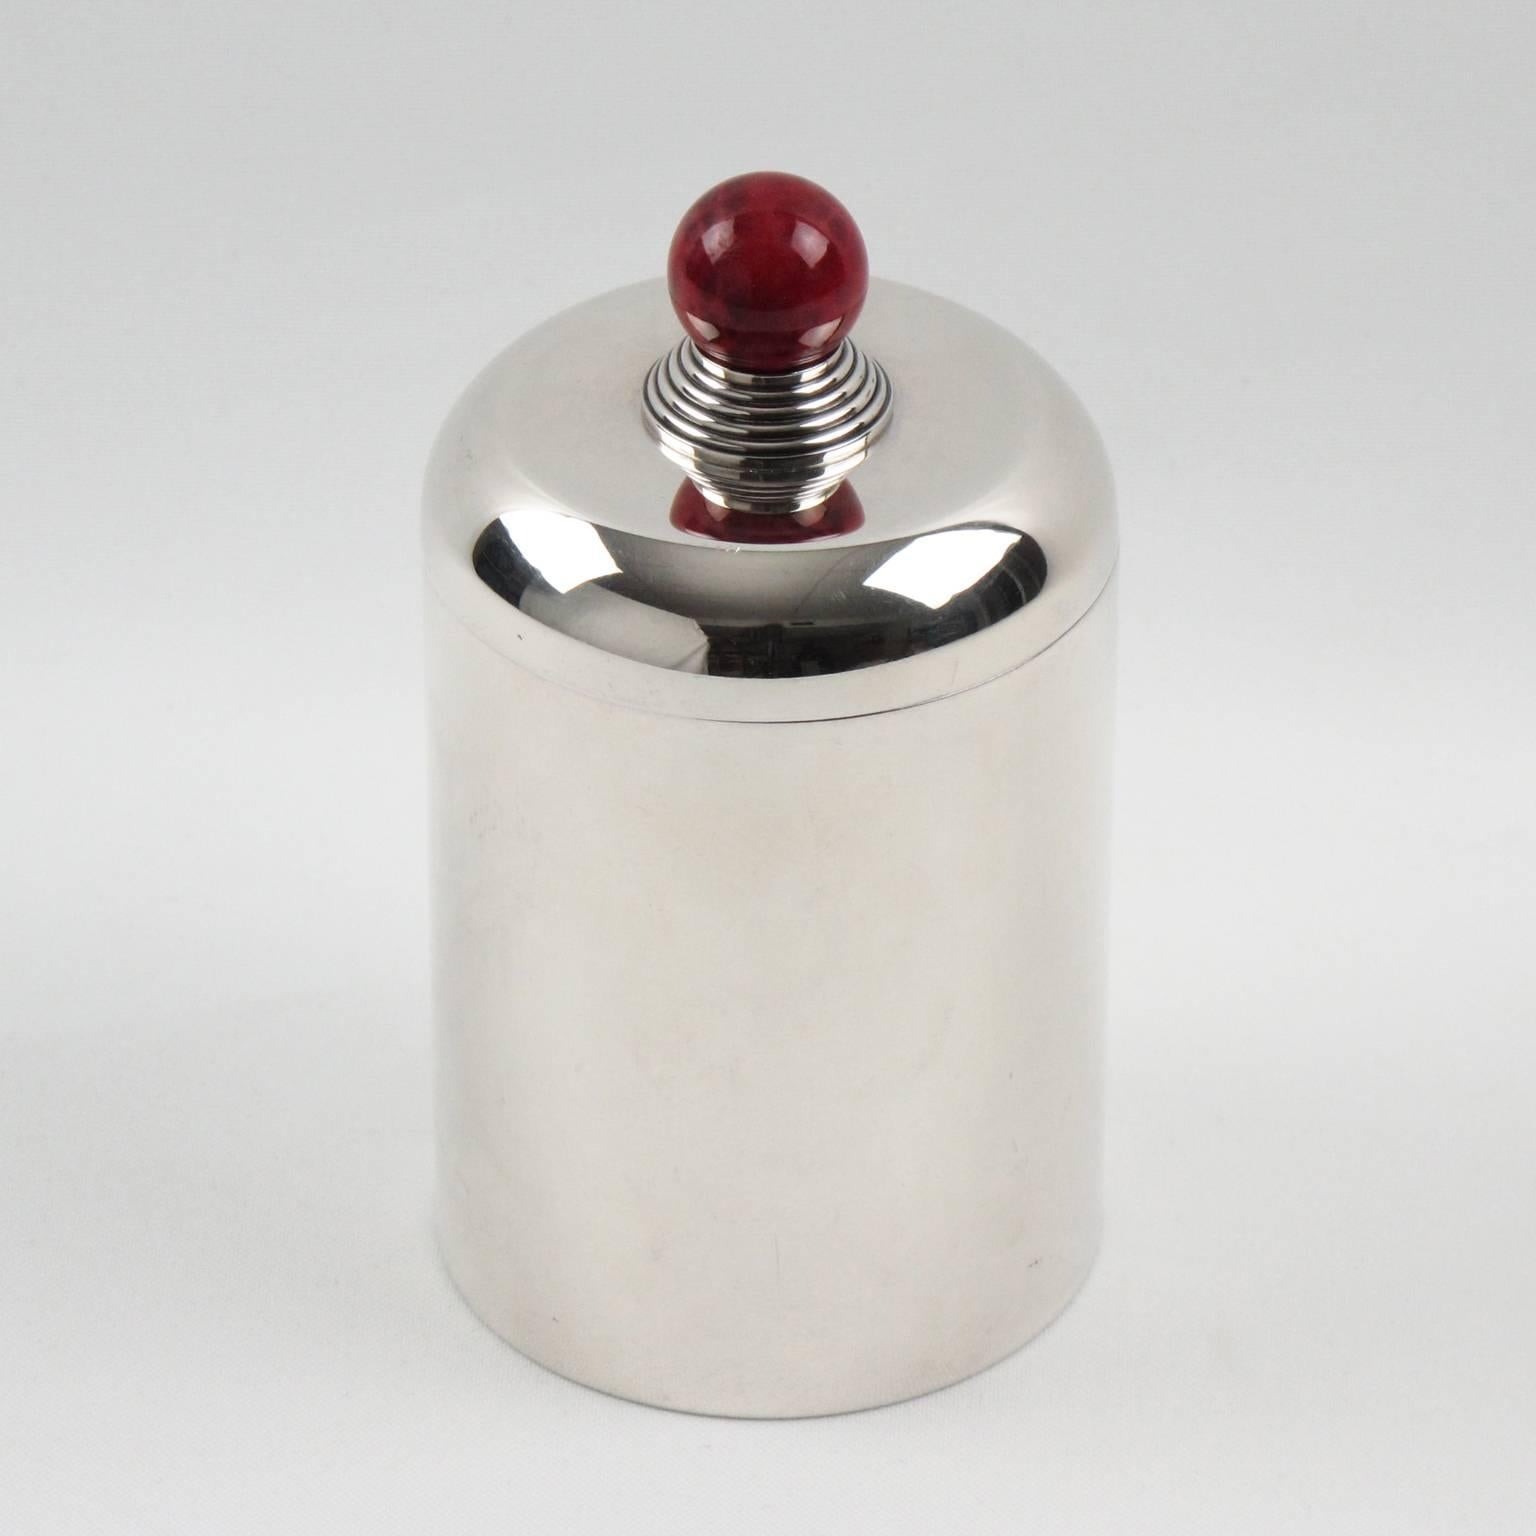 Lovely Art Deco silver plate lidded box by Puiforcat, France. Jean Puiforcat designed this elegant piece in the 1930s and Puiforcat France continues editing this collection until the 1970s. Minimalist round shape with lid topped with red agate stone